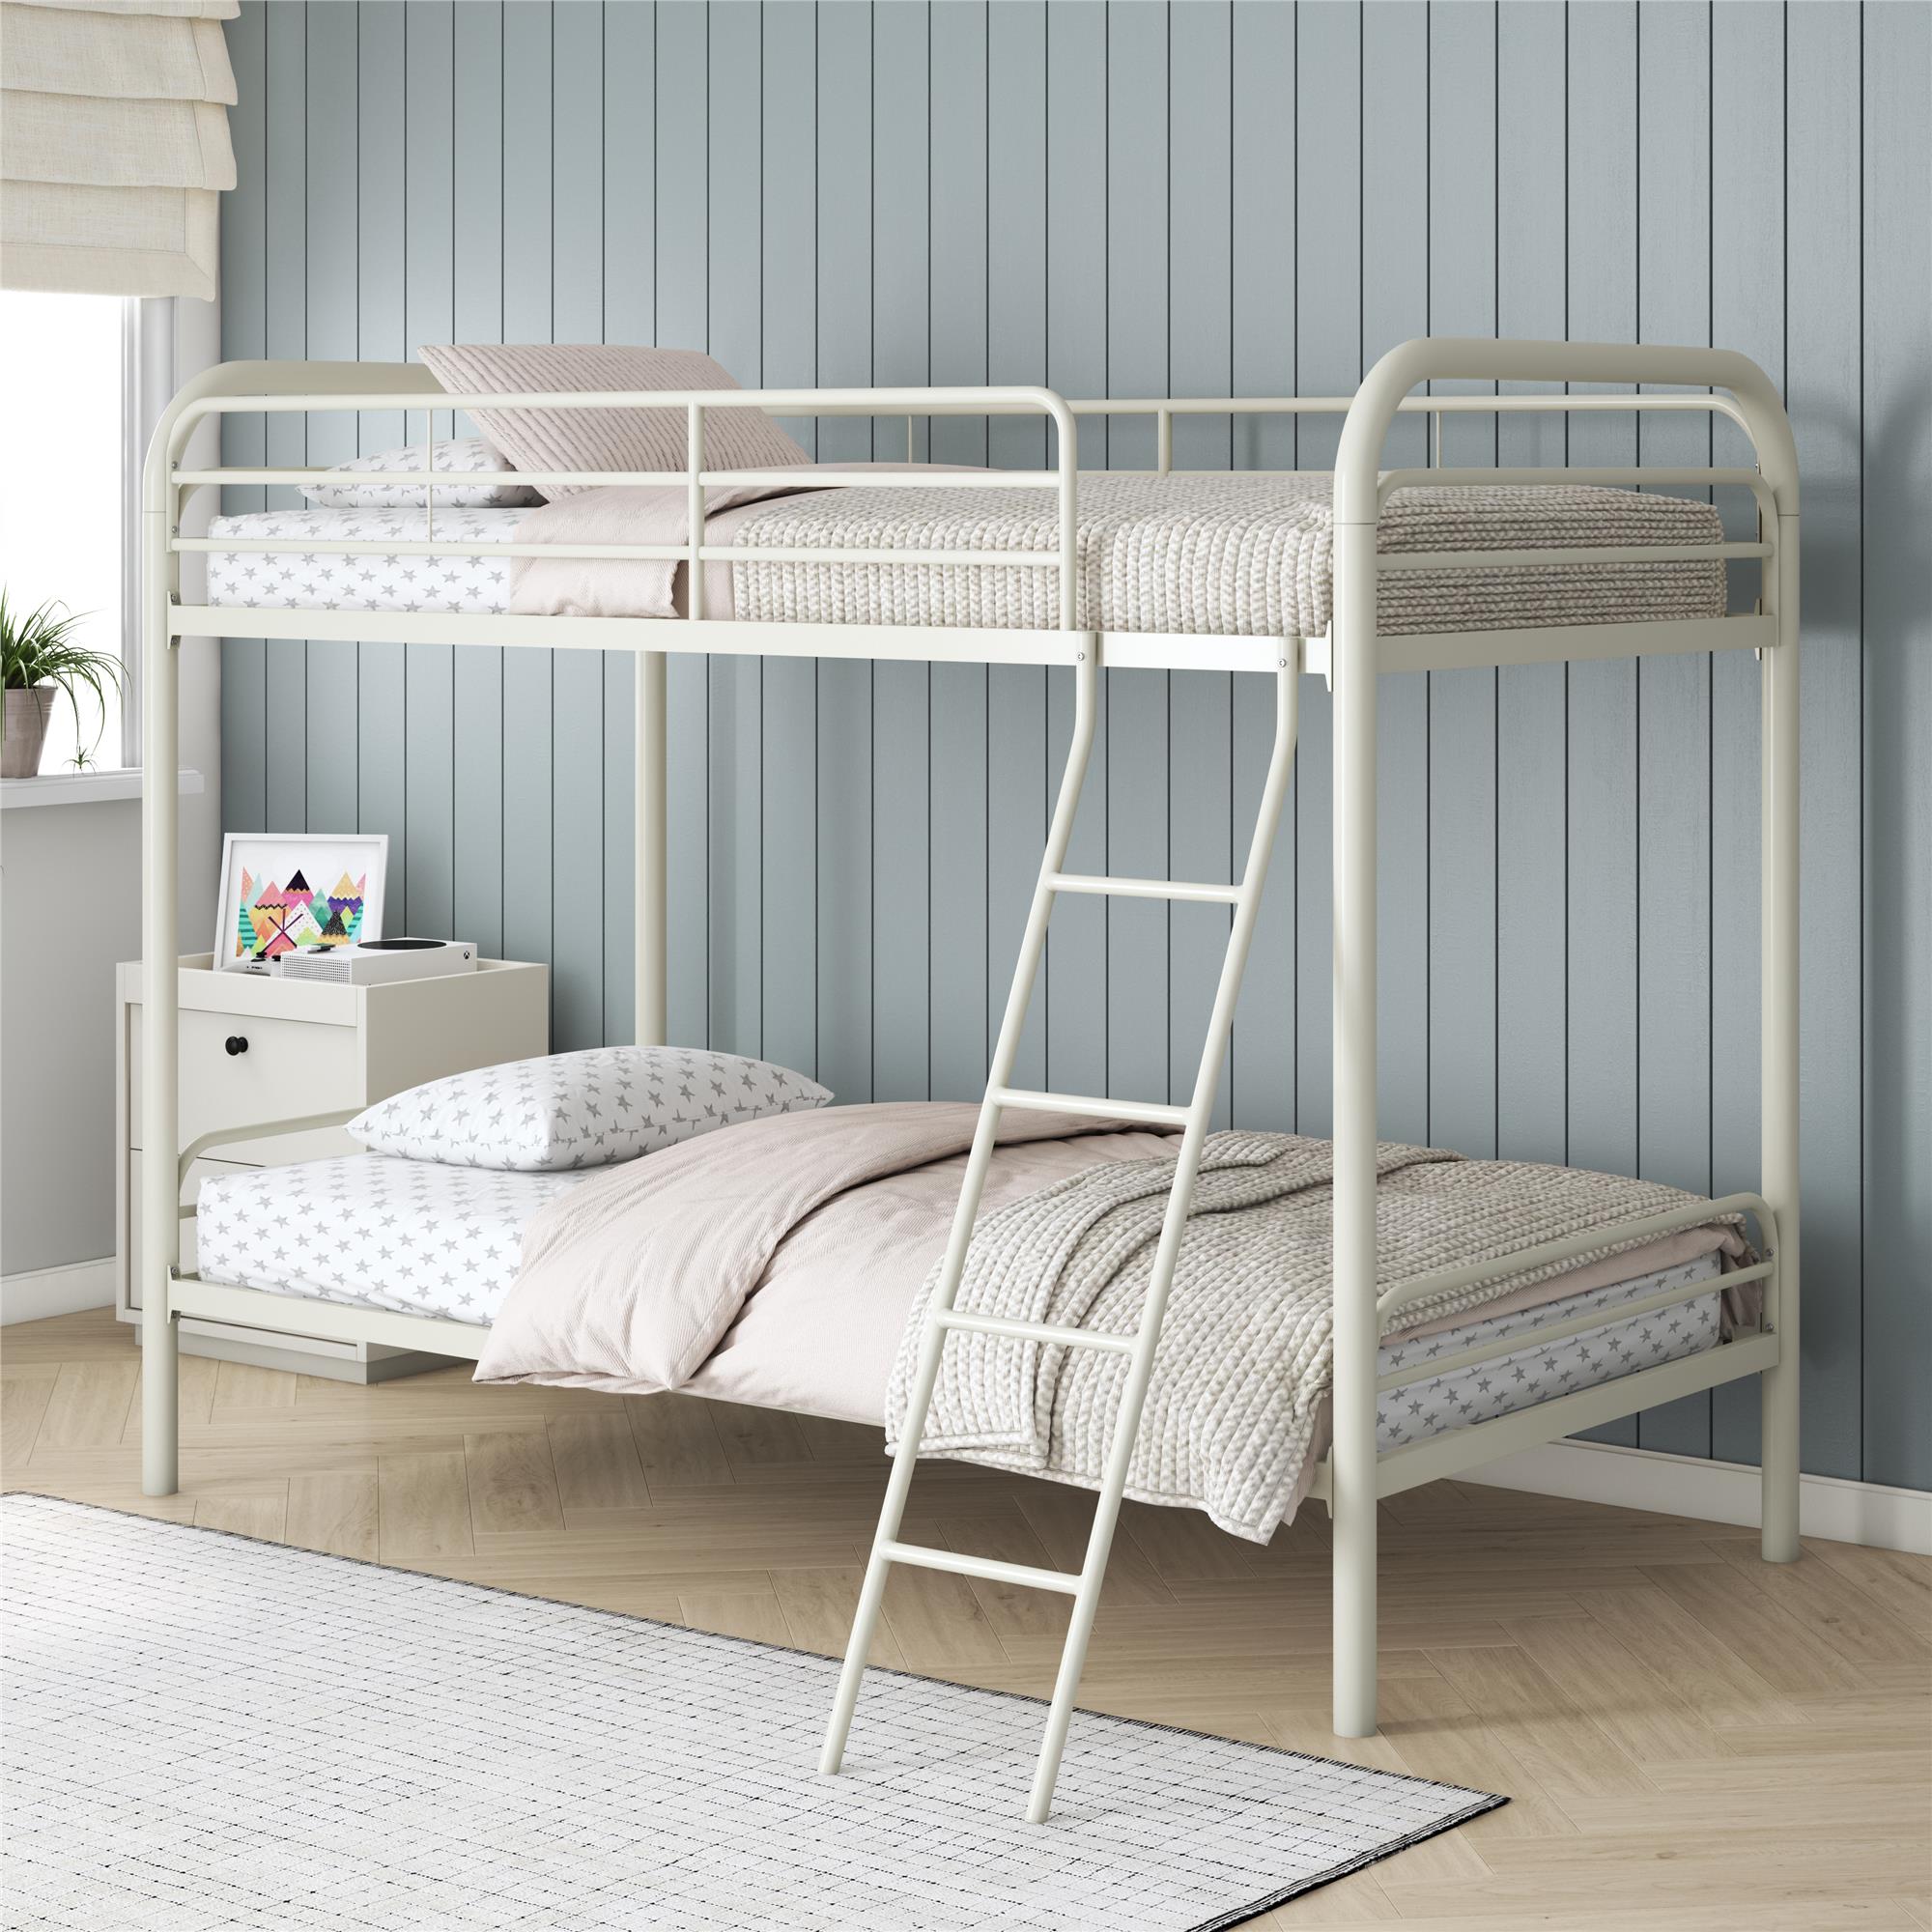 DHP Dusty Twin over Twin Metal Bunk Bed with Secured Ladder, Off White - image 2 of 9